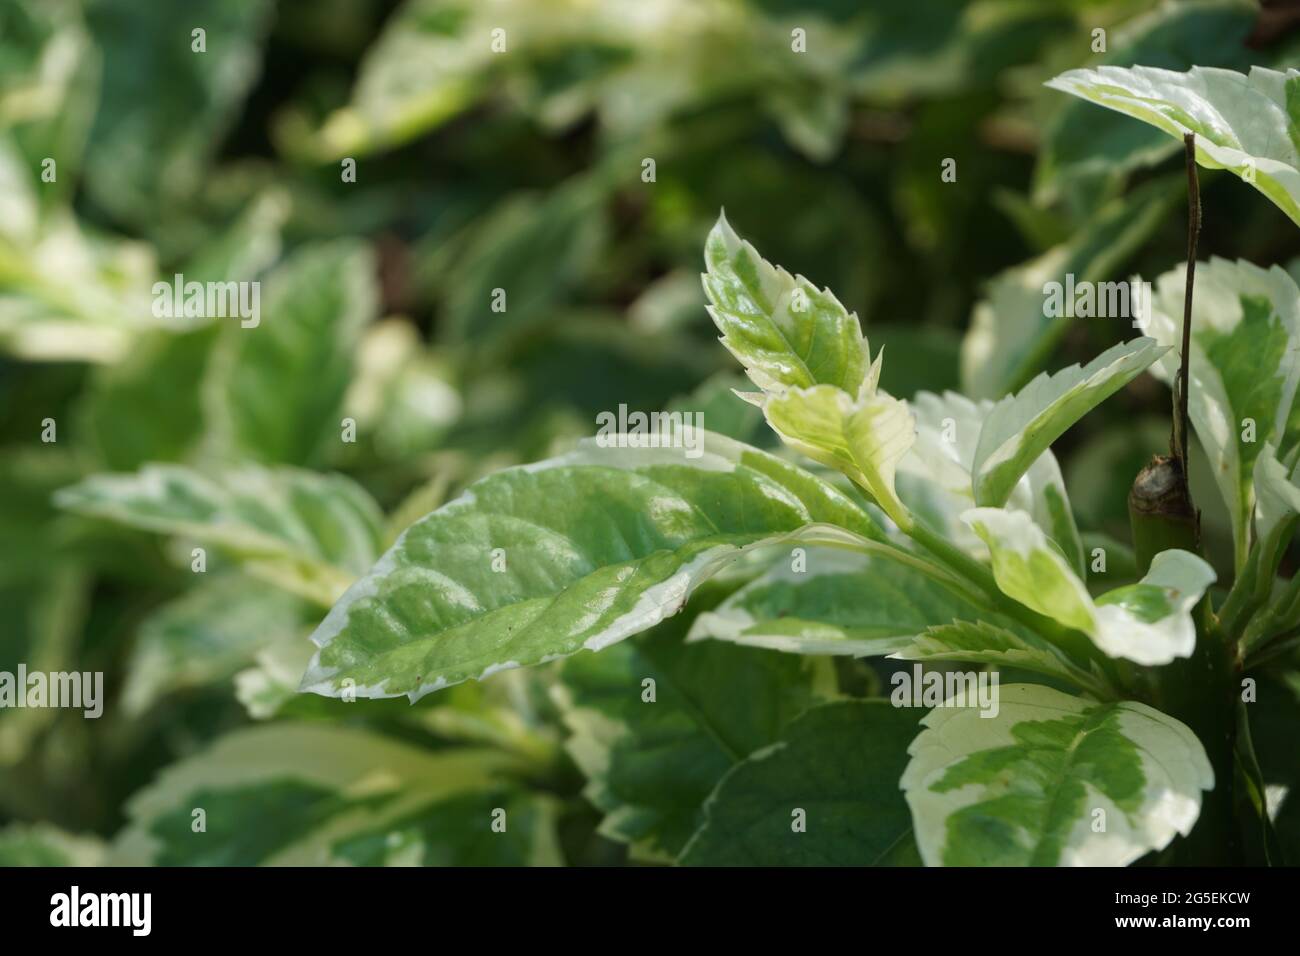 Styrax japonica variegata leaves with a natural background Stock Photo